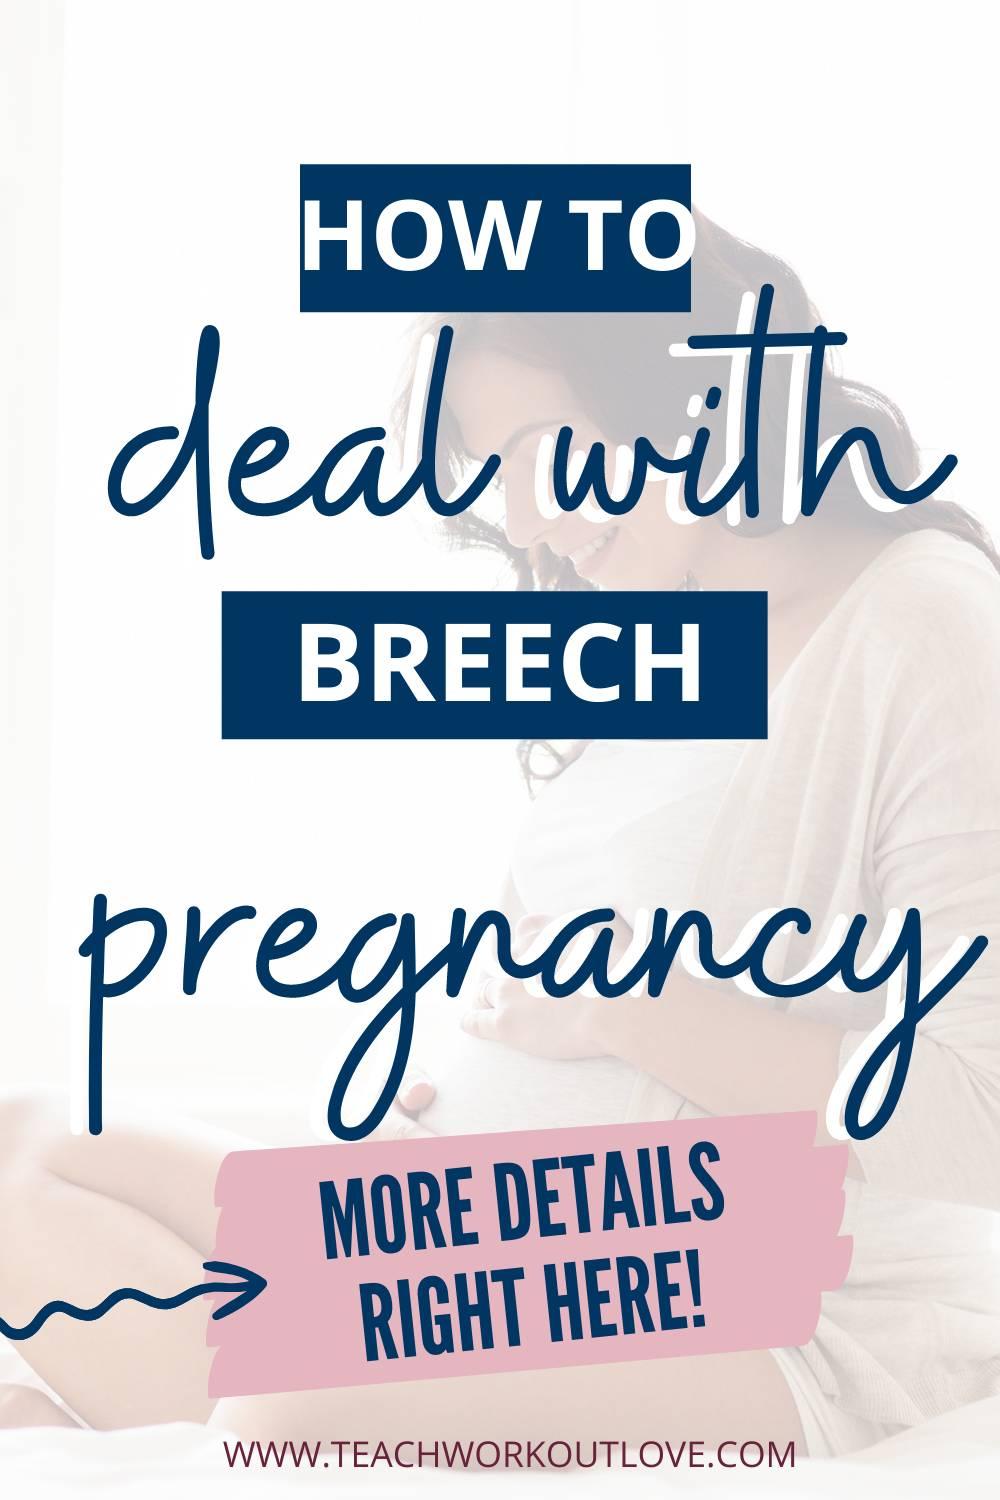 Now, it’s important to know that breech pregnancies are not dangerous until it’s time for the baby to be born, where there is some risk that the baby could get stuck in the birth canal - but as with all things, early diagnosis is key and understanding what you can safely do to aid safe and successful childbirth could make a difference.